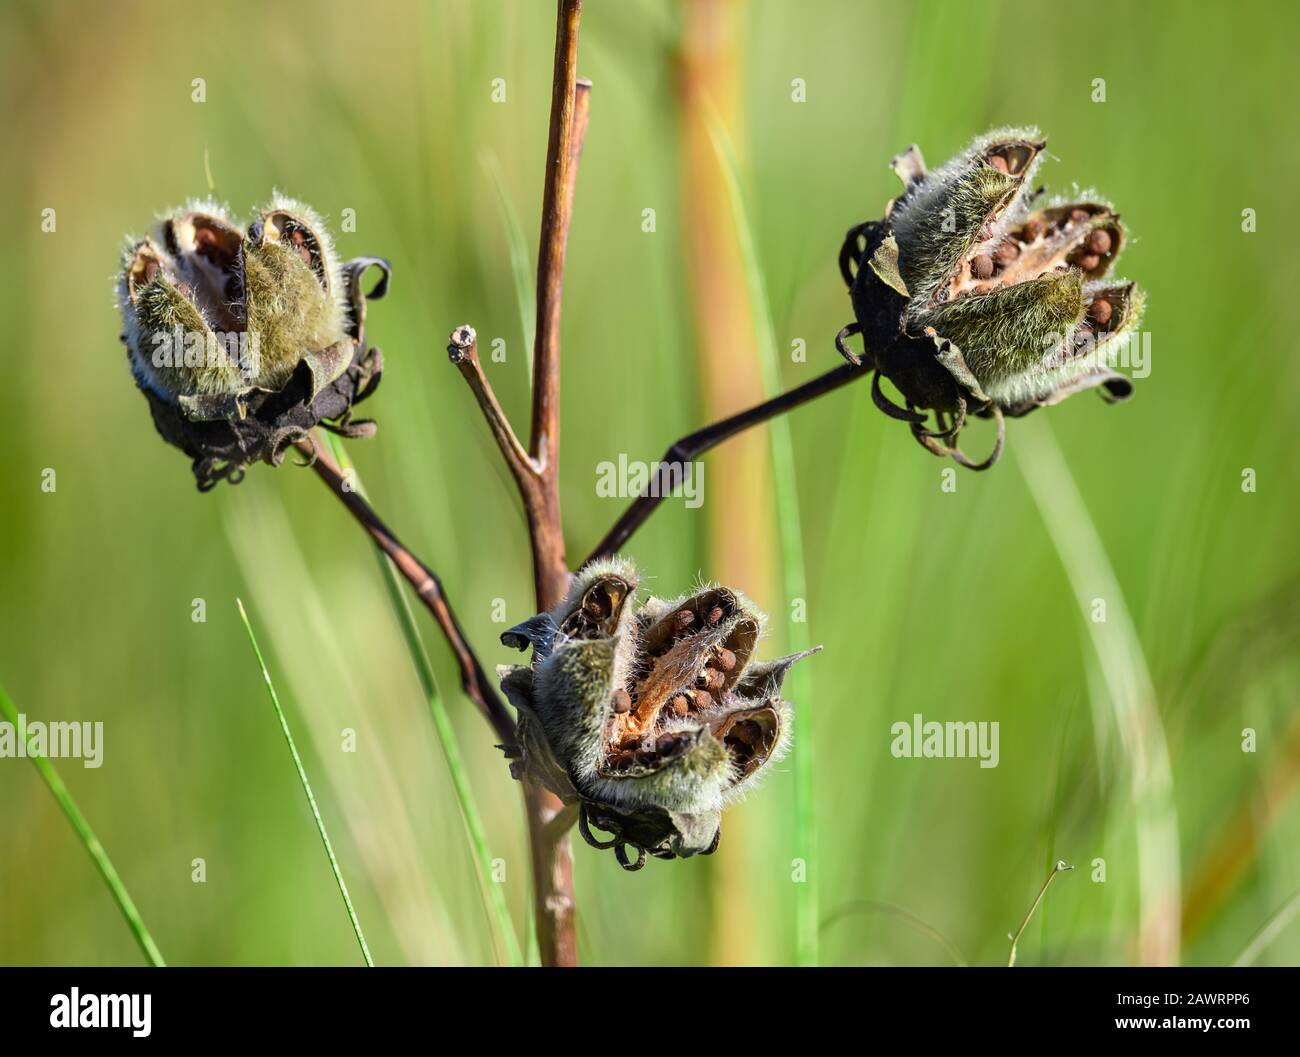 Seed pods cracked open, exposed the seeds. Houston, Texas, USA. Stock Photo